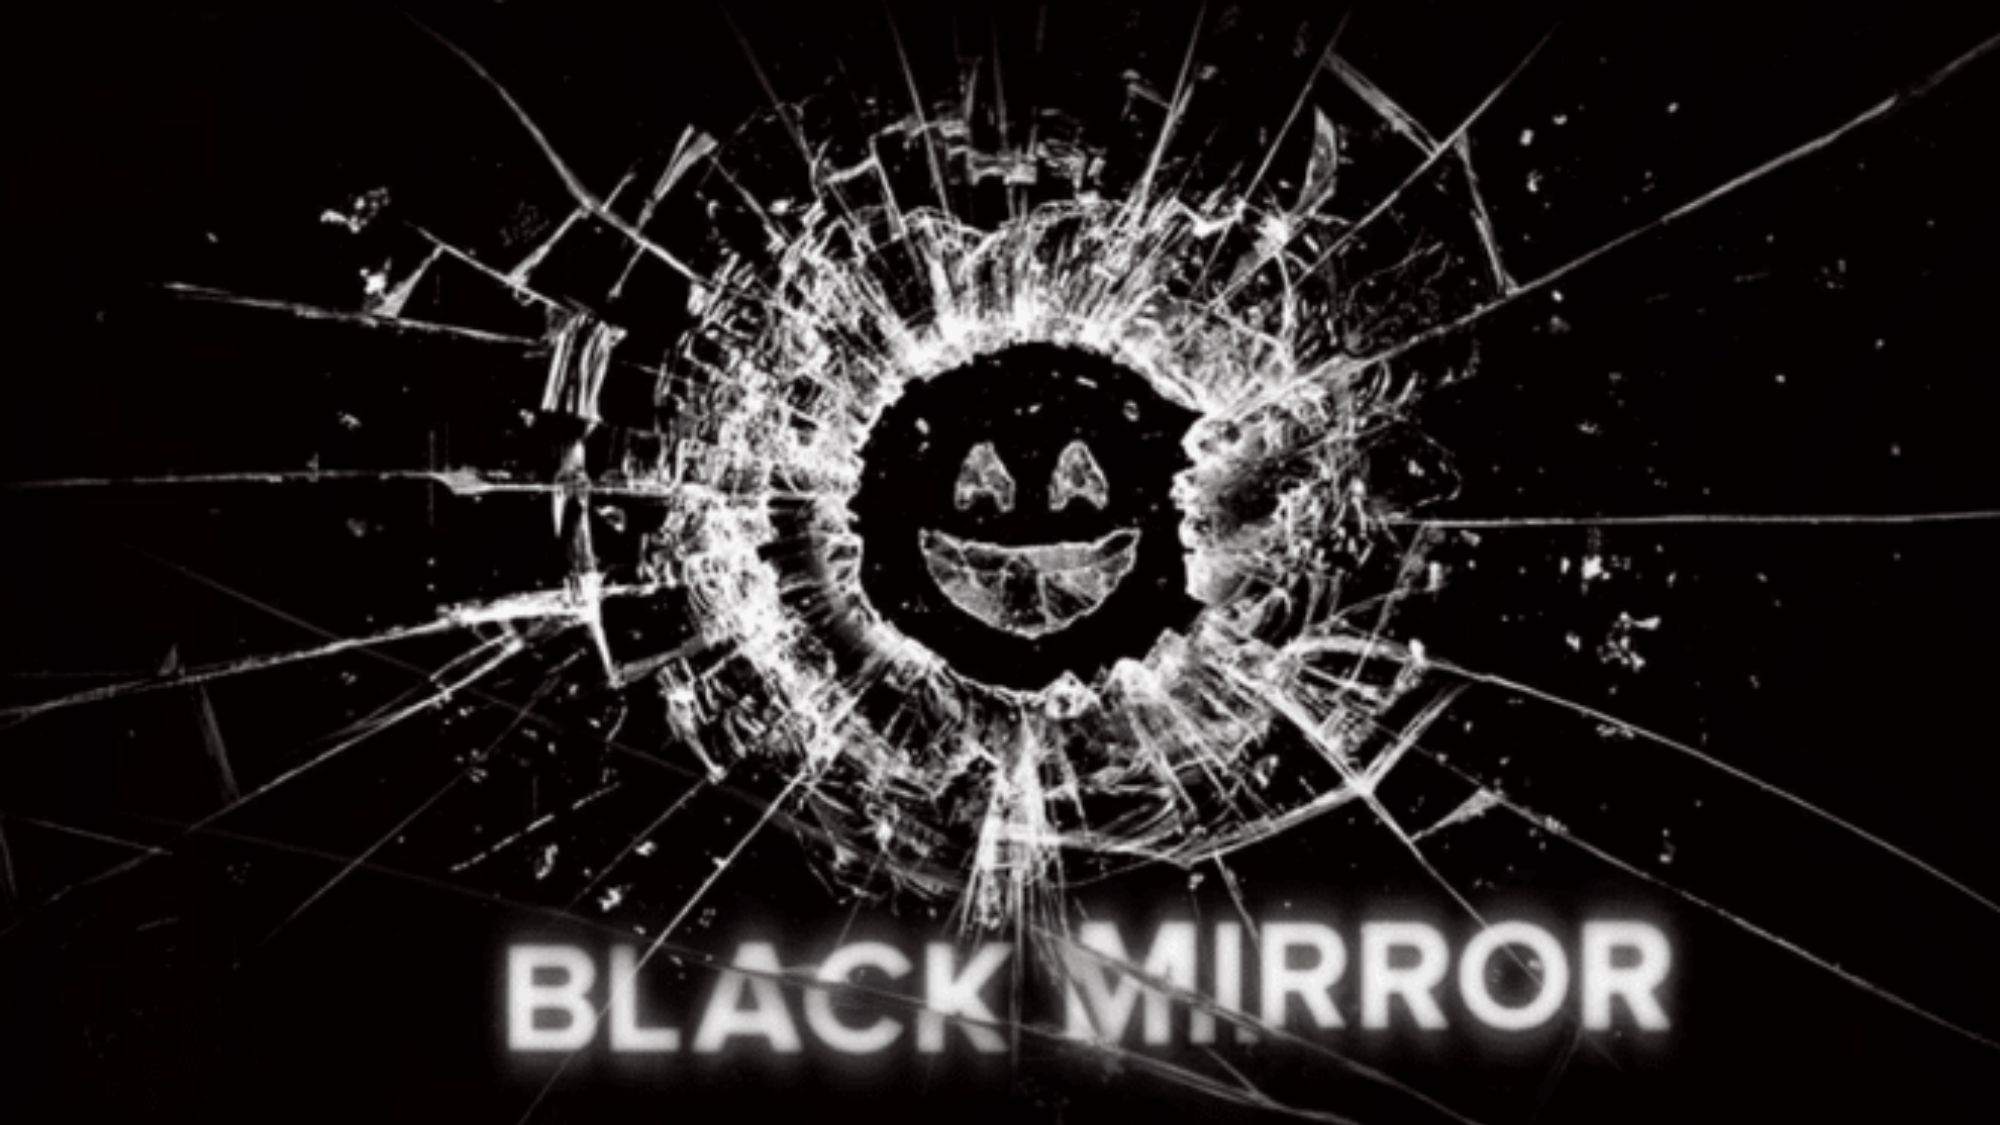 Black Mirror Season 5: Why are the review critics not liking the latest Netflix series?